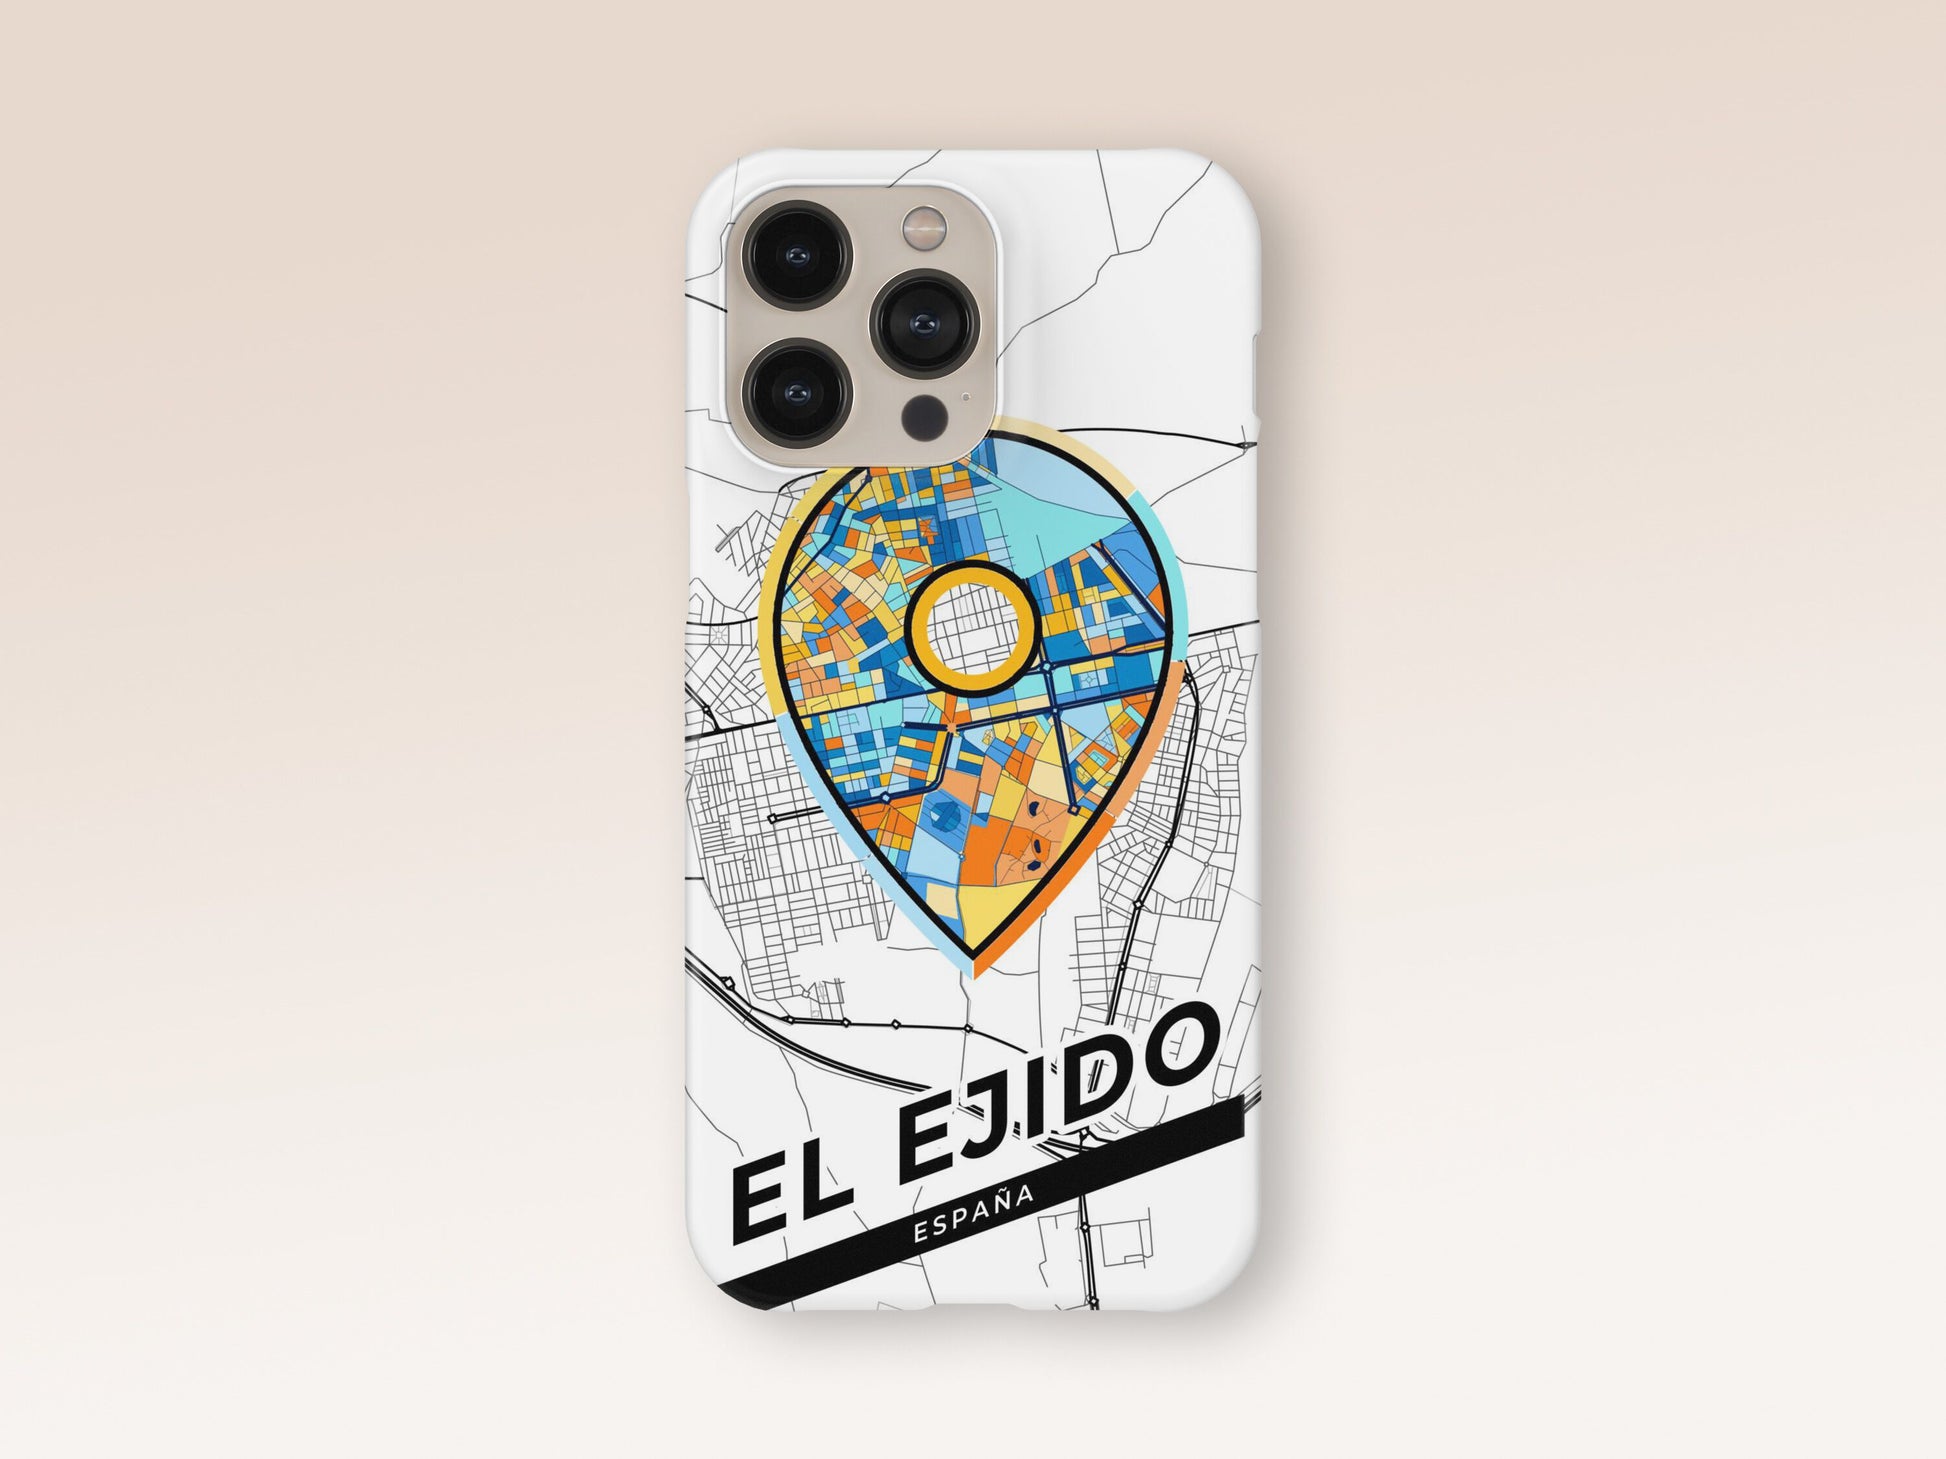 El Ejido Spain slim phone case with colorful icon. Birthday, wedding or housewarming gift. Couple match cases. 1